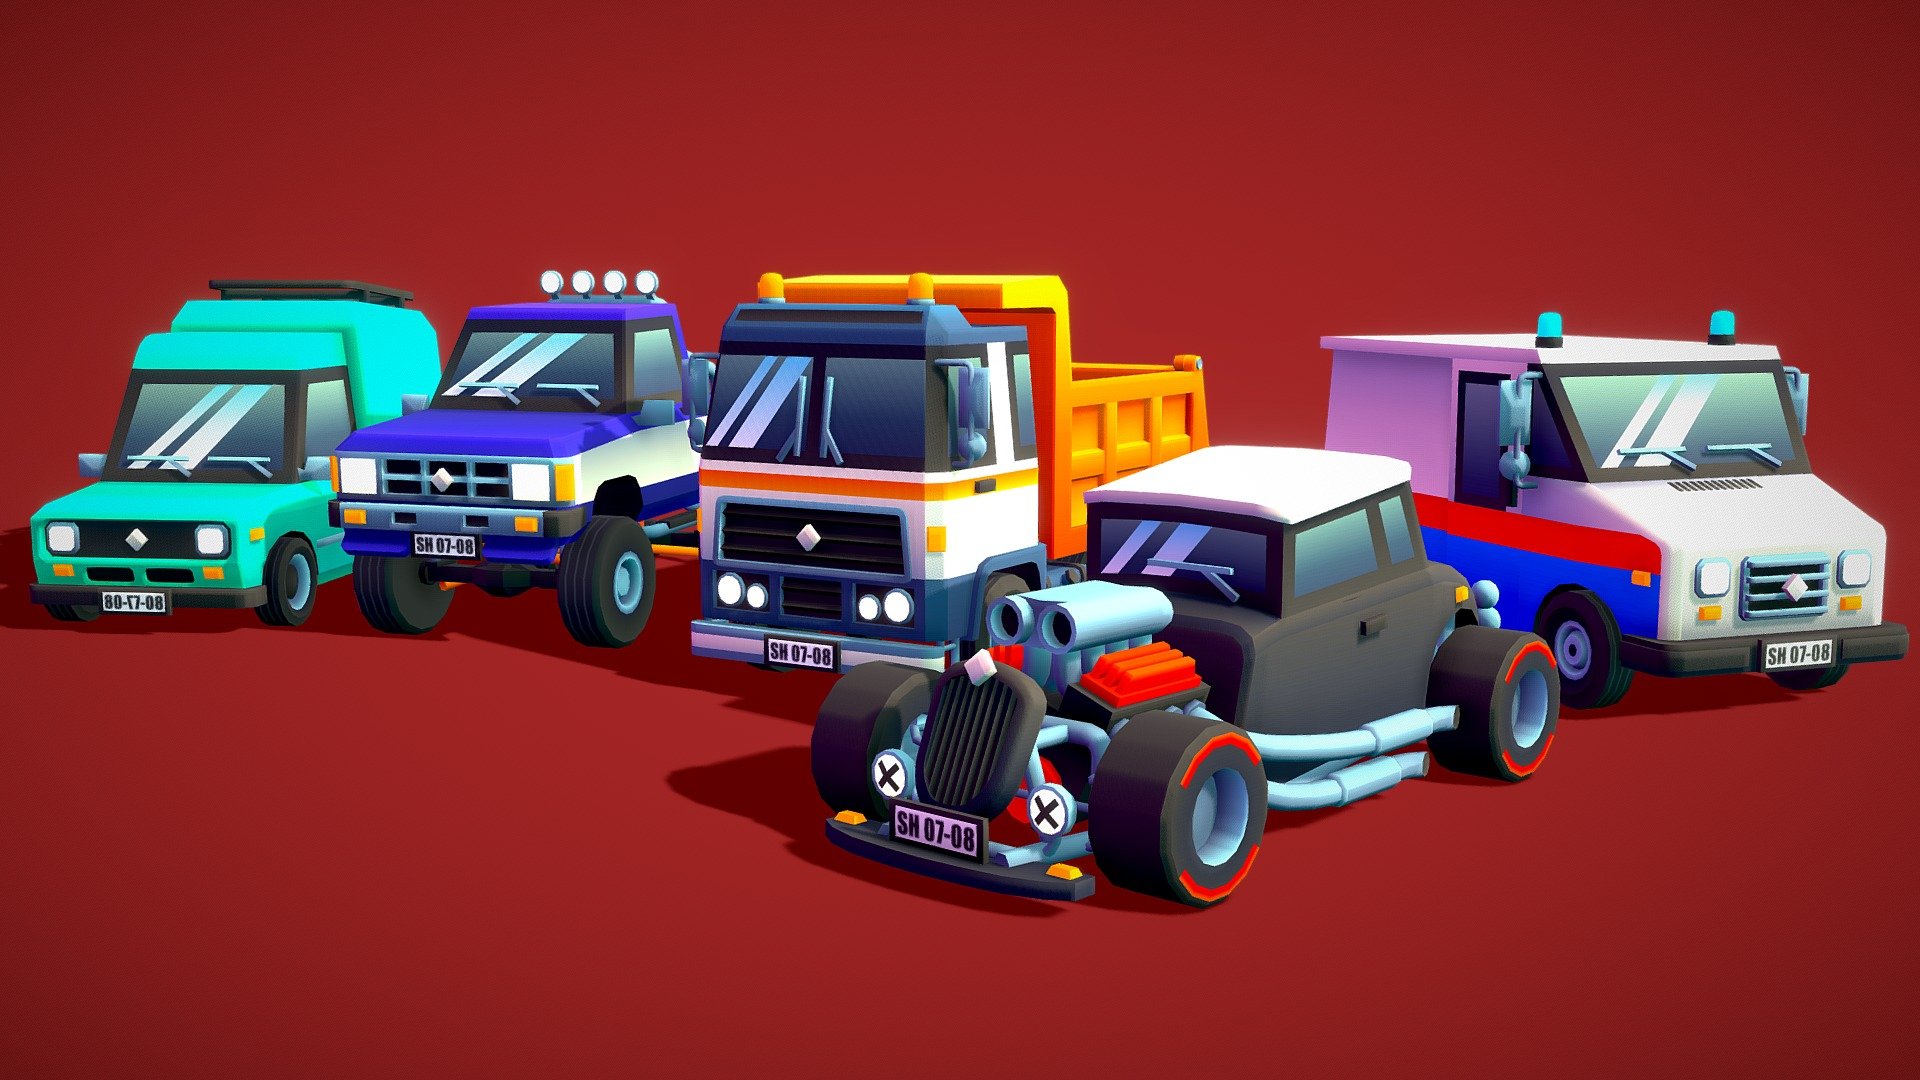 Pack of 5 toon cars.
Update for &ldquo;Low Poly Toon City Cars Pack